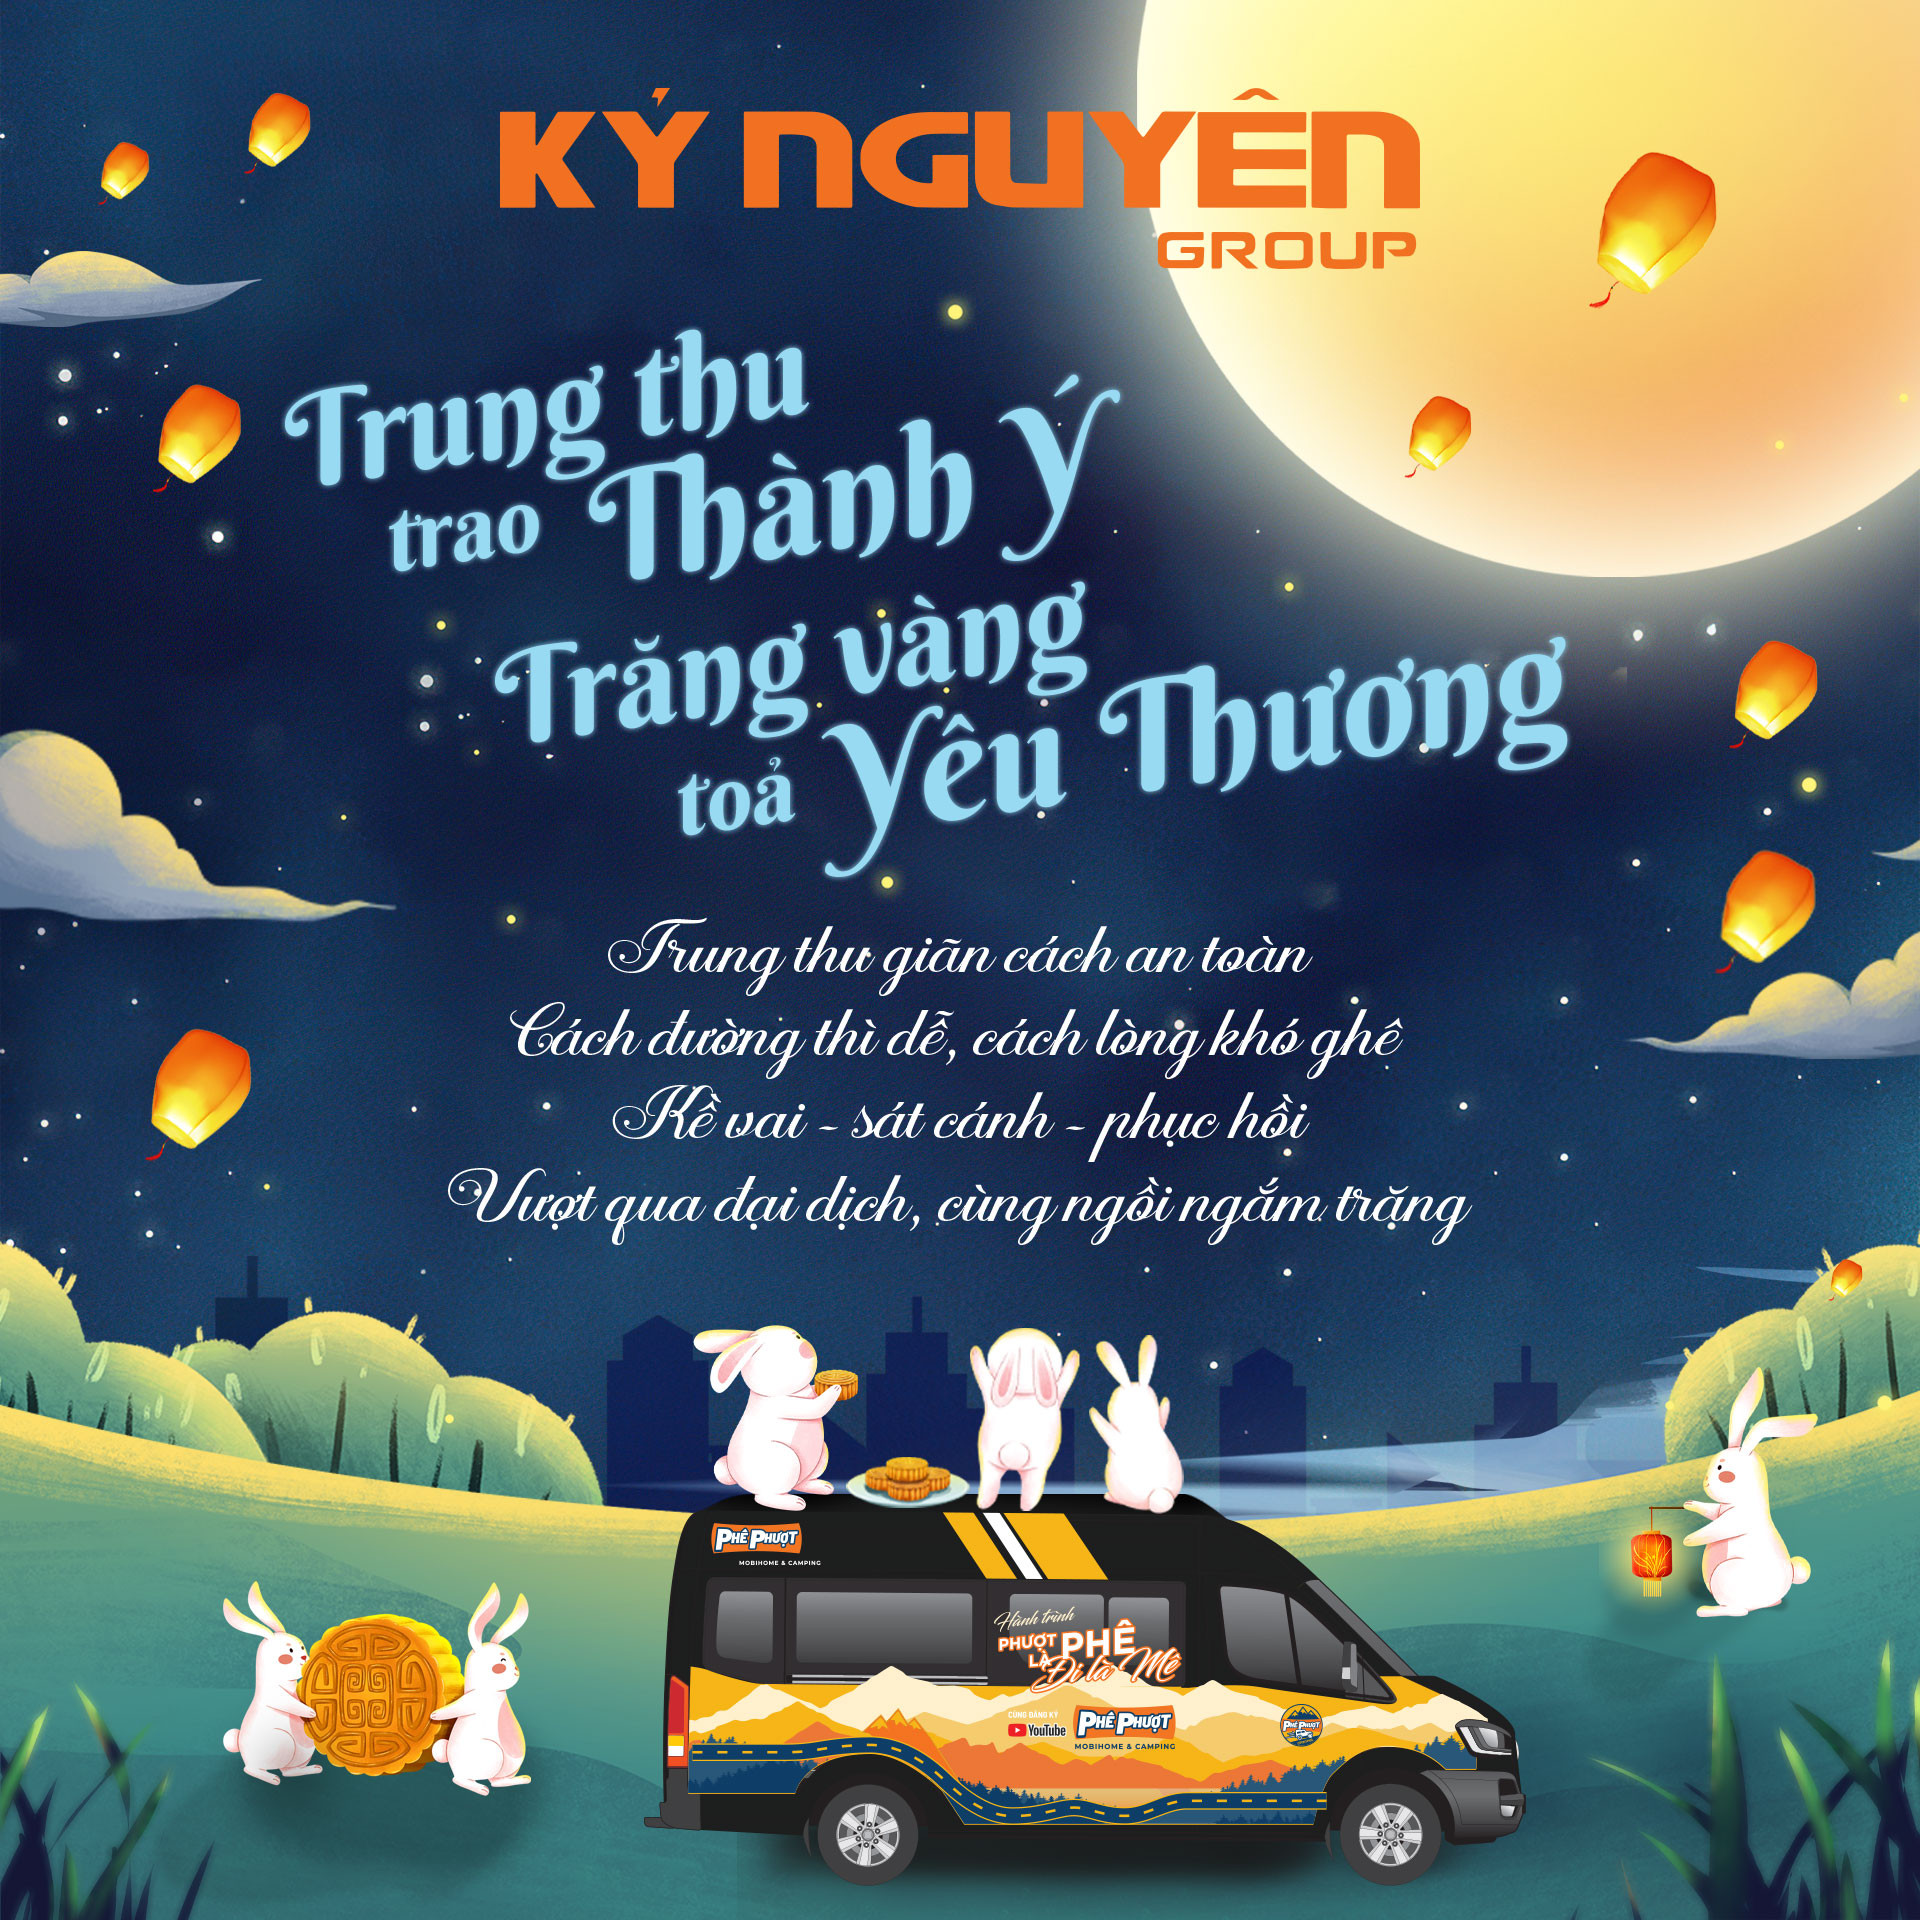 Ky Nguyen Group sends gratitude on the occasion of Mid-Autumn Festival